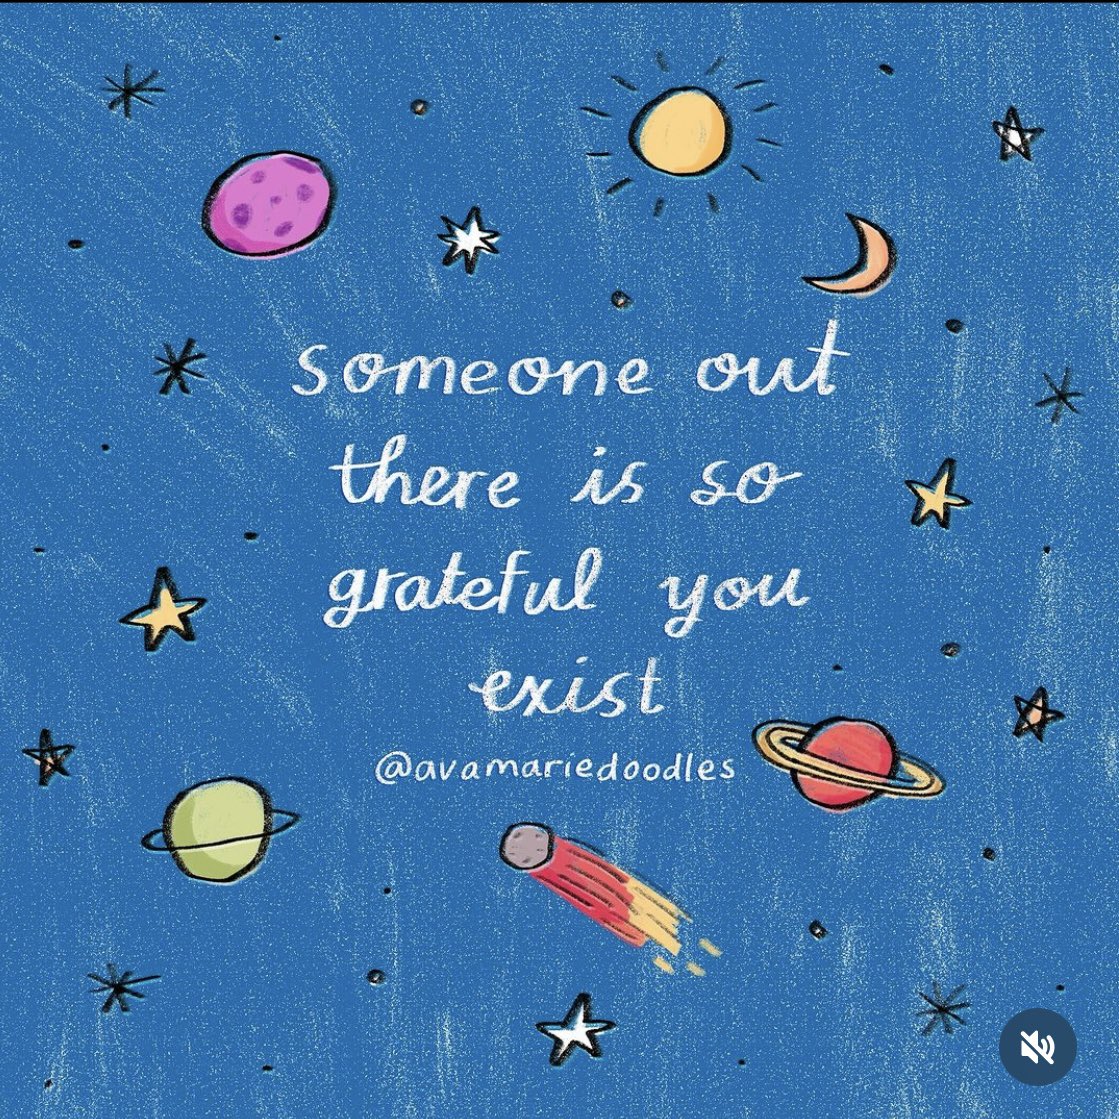 There are people out there (and here) who are grateful you exist Image: instagram.com/avamariedoodles